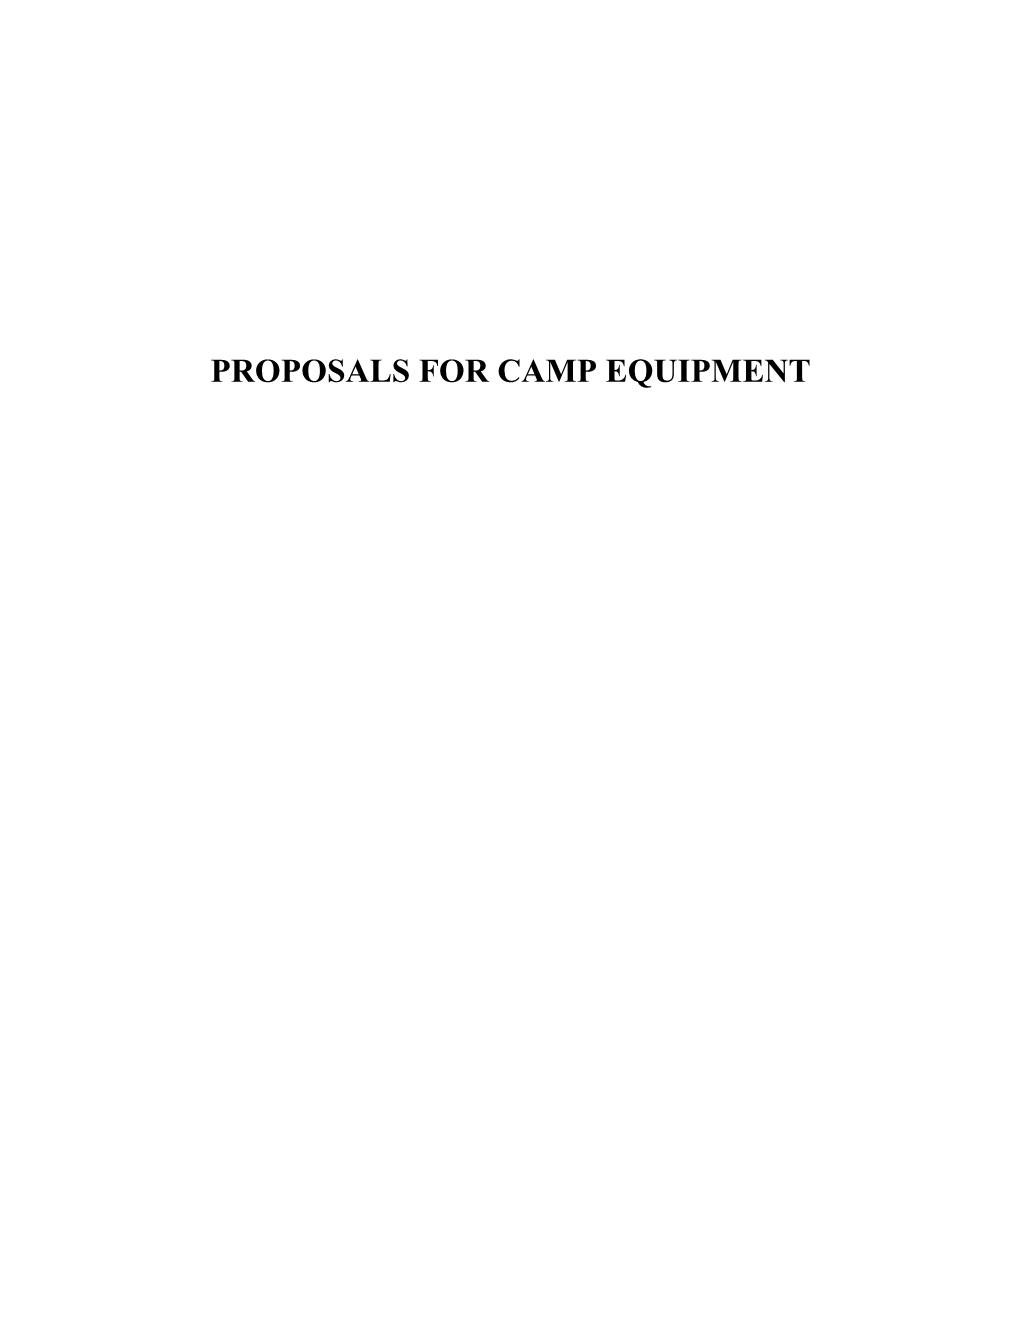 Proposals for Camp Equipment